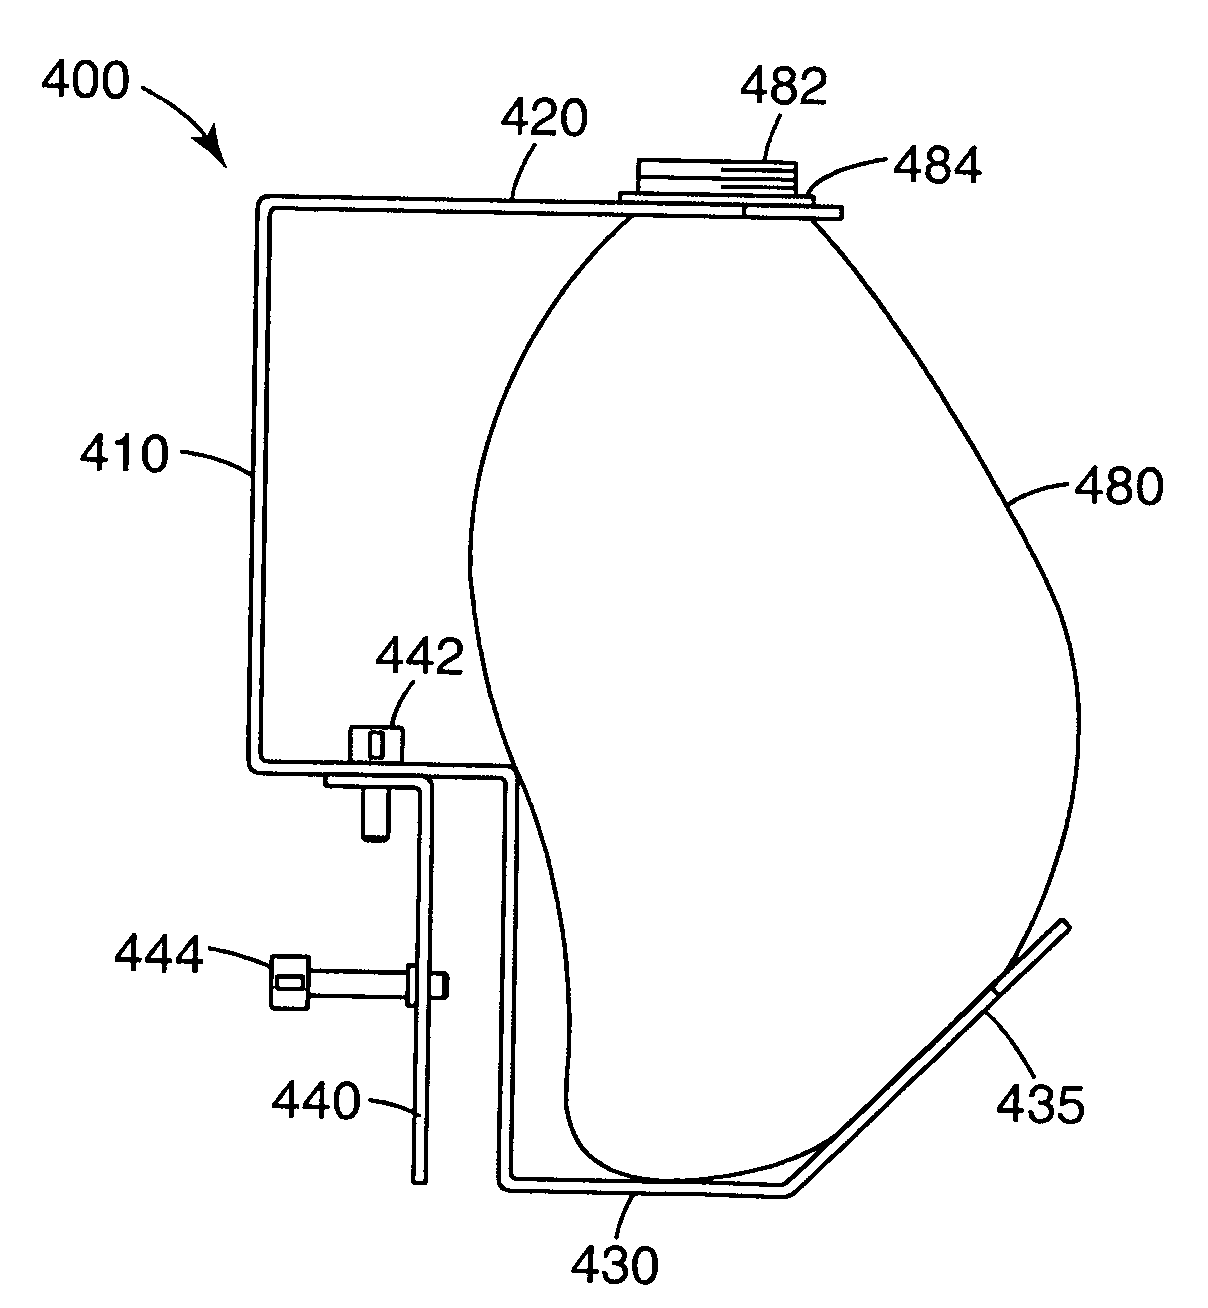 Apparatus for filling and refilling a flexible container